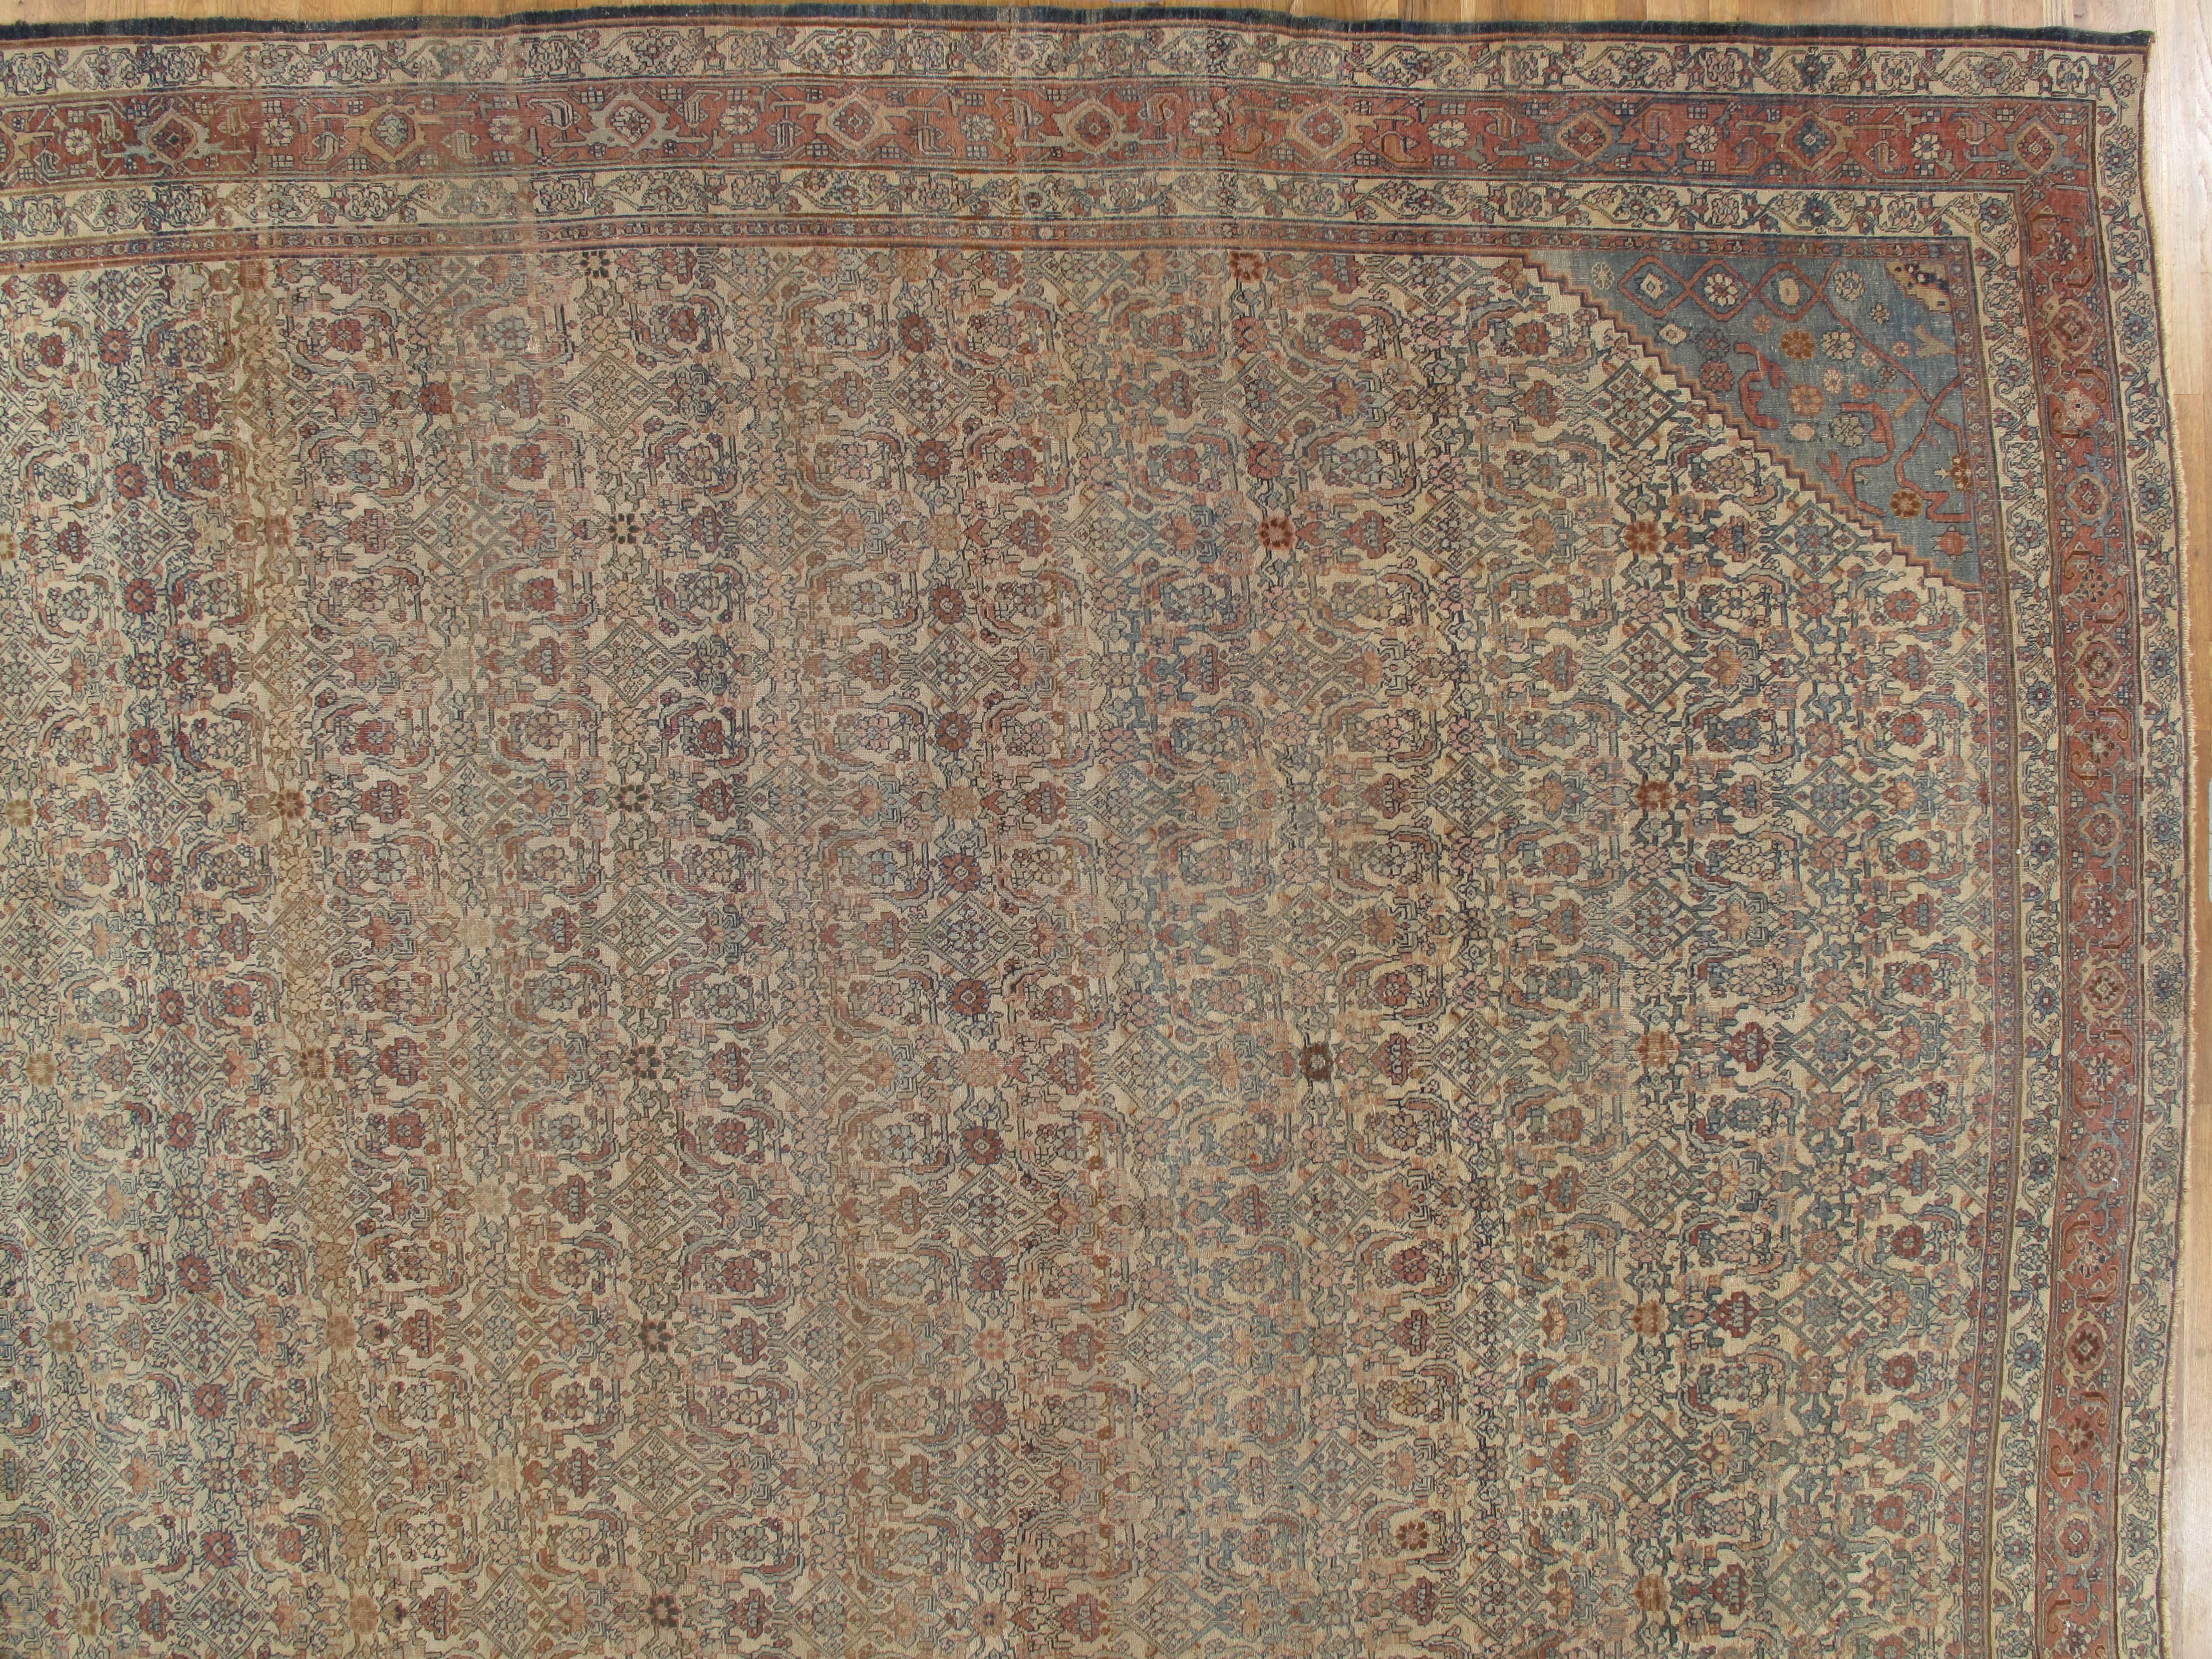 Bijar rugs are often called the iron rugs of Persia. The Bijar is a heavy durable rug that has been very popular in the United States. Most Bijar carpets are woven by Kurds in the Gerus area. This is a very nice fine example. Size: 14'5